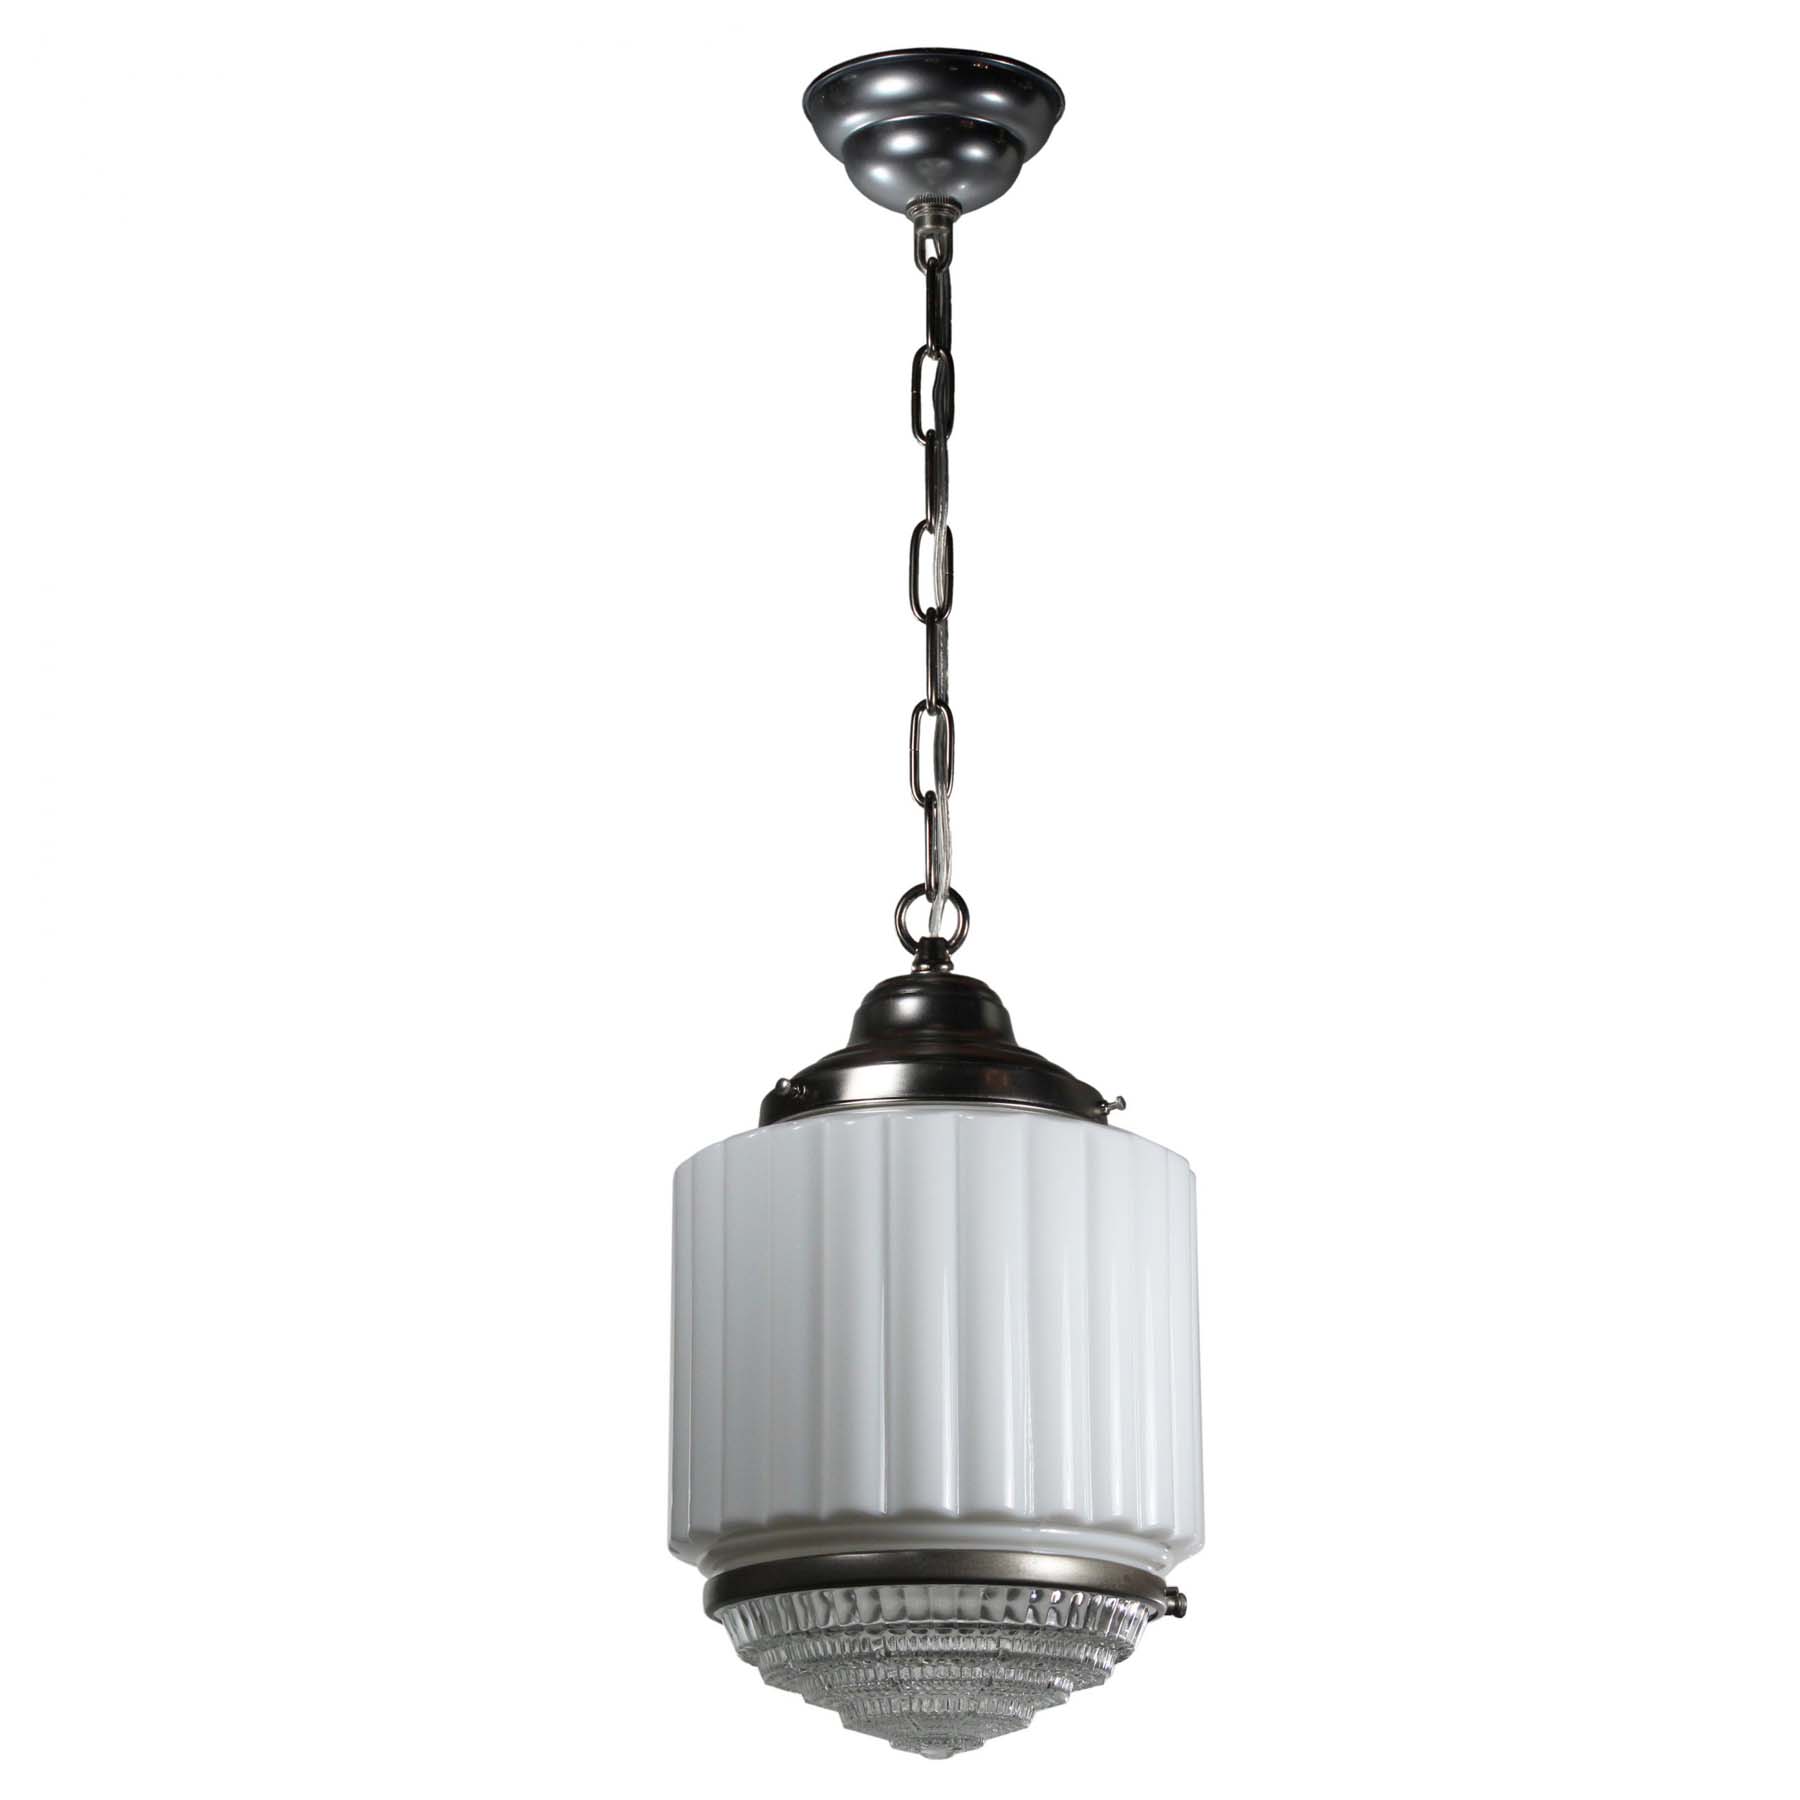 SOLD Art Deco Skyscraper Pendant Light with Two-Part Prismatic Shade, Antique Lighting-70523